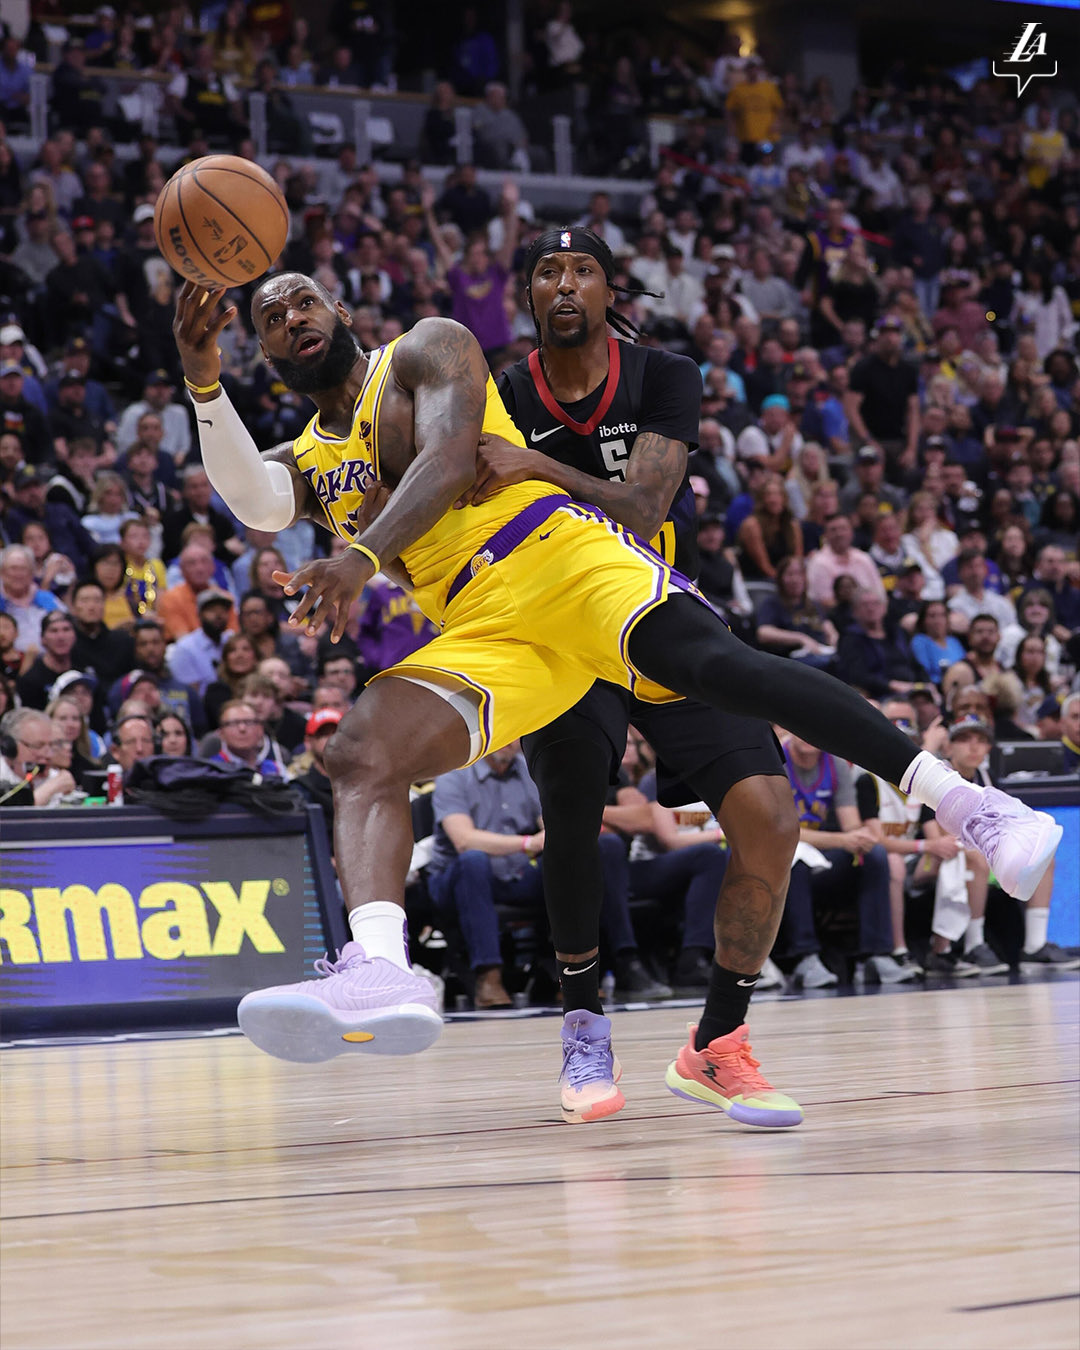 Lakers vs Nuggets: LeBron James Criticizes Officiating After Brutal Loss in Game 2 - THE SPORTS ROOM